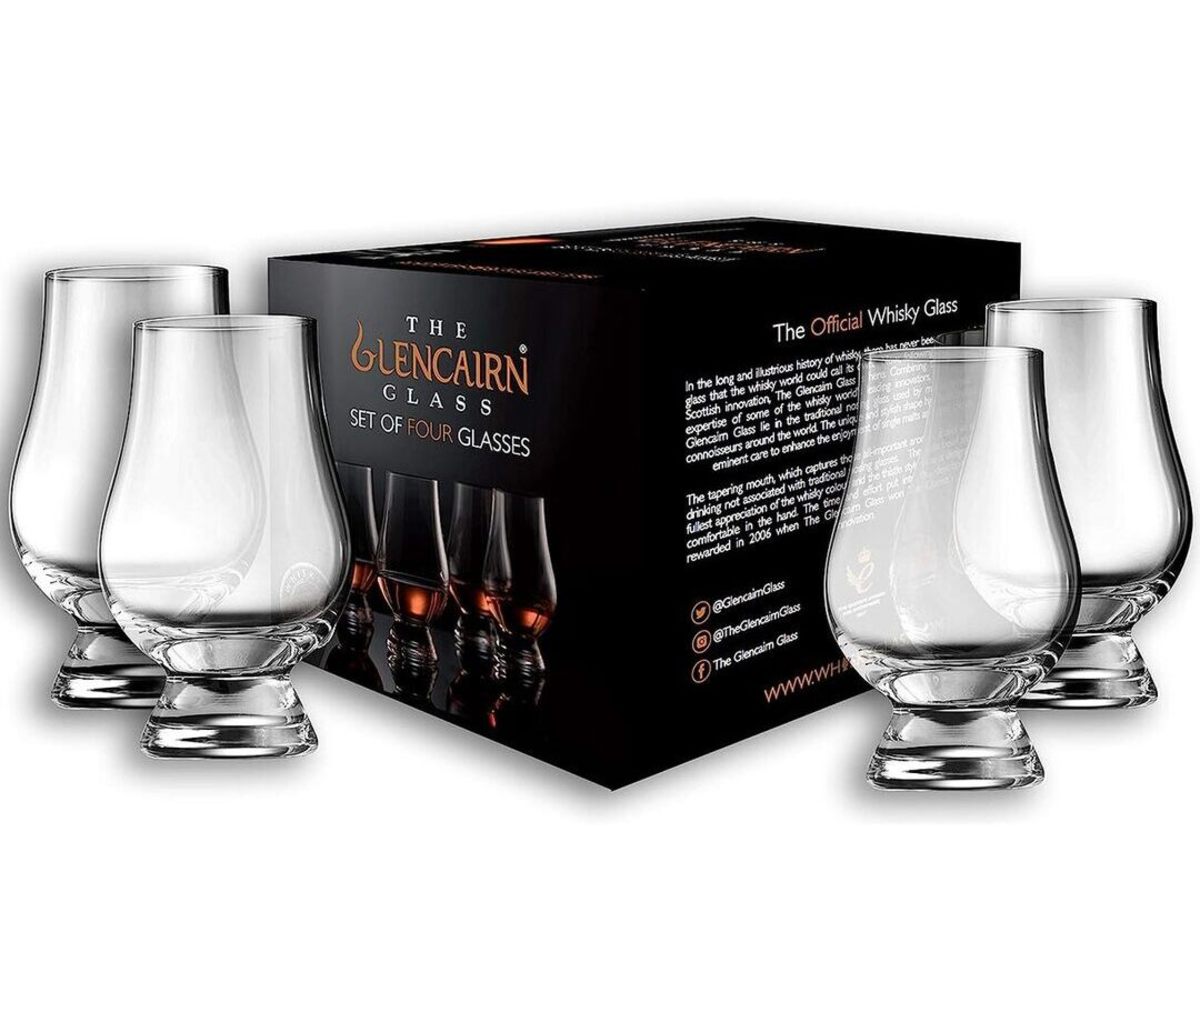 Attractive Highball Glasses with Square Bottom Clear Heavy Base